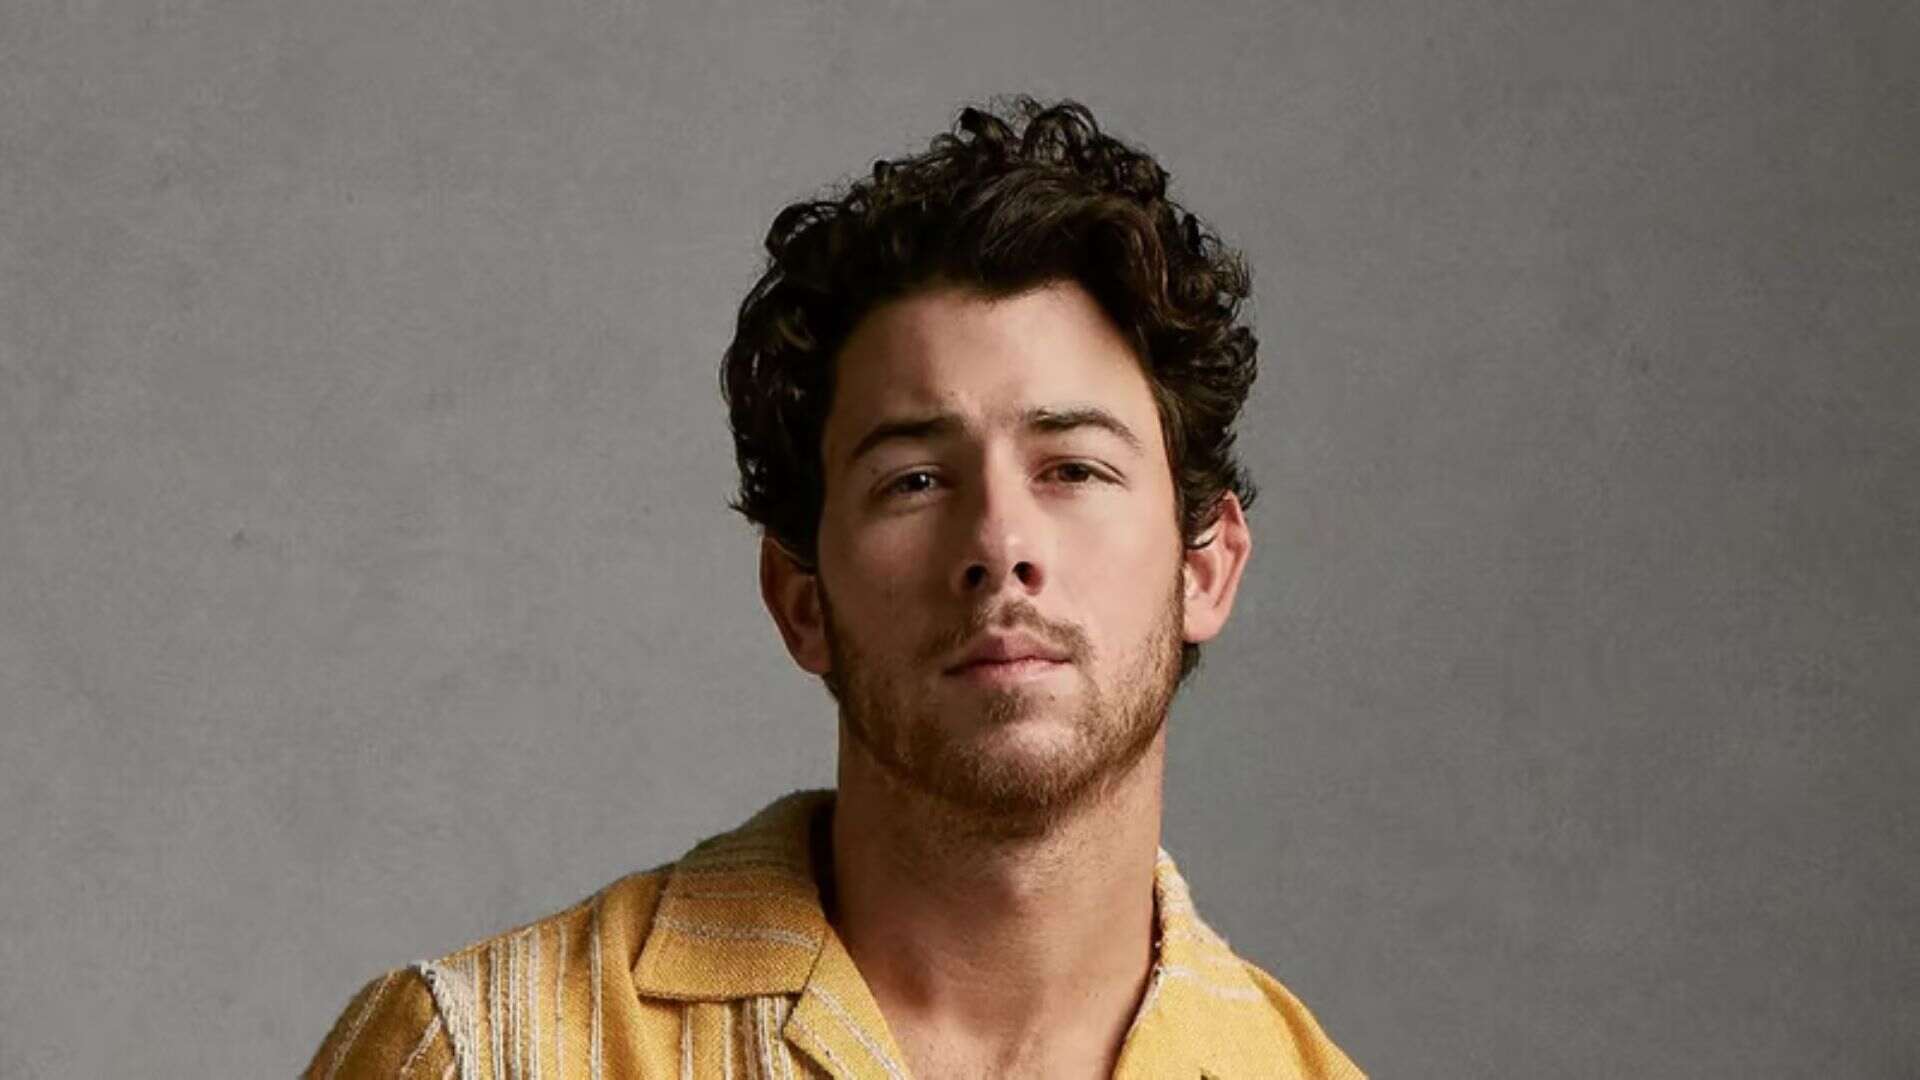 Nick Jonas has been diagnosed with influenza A